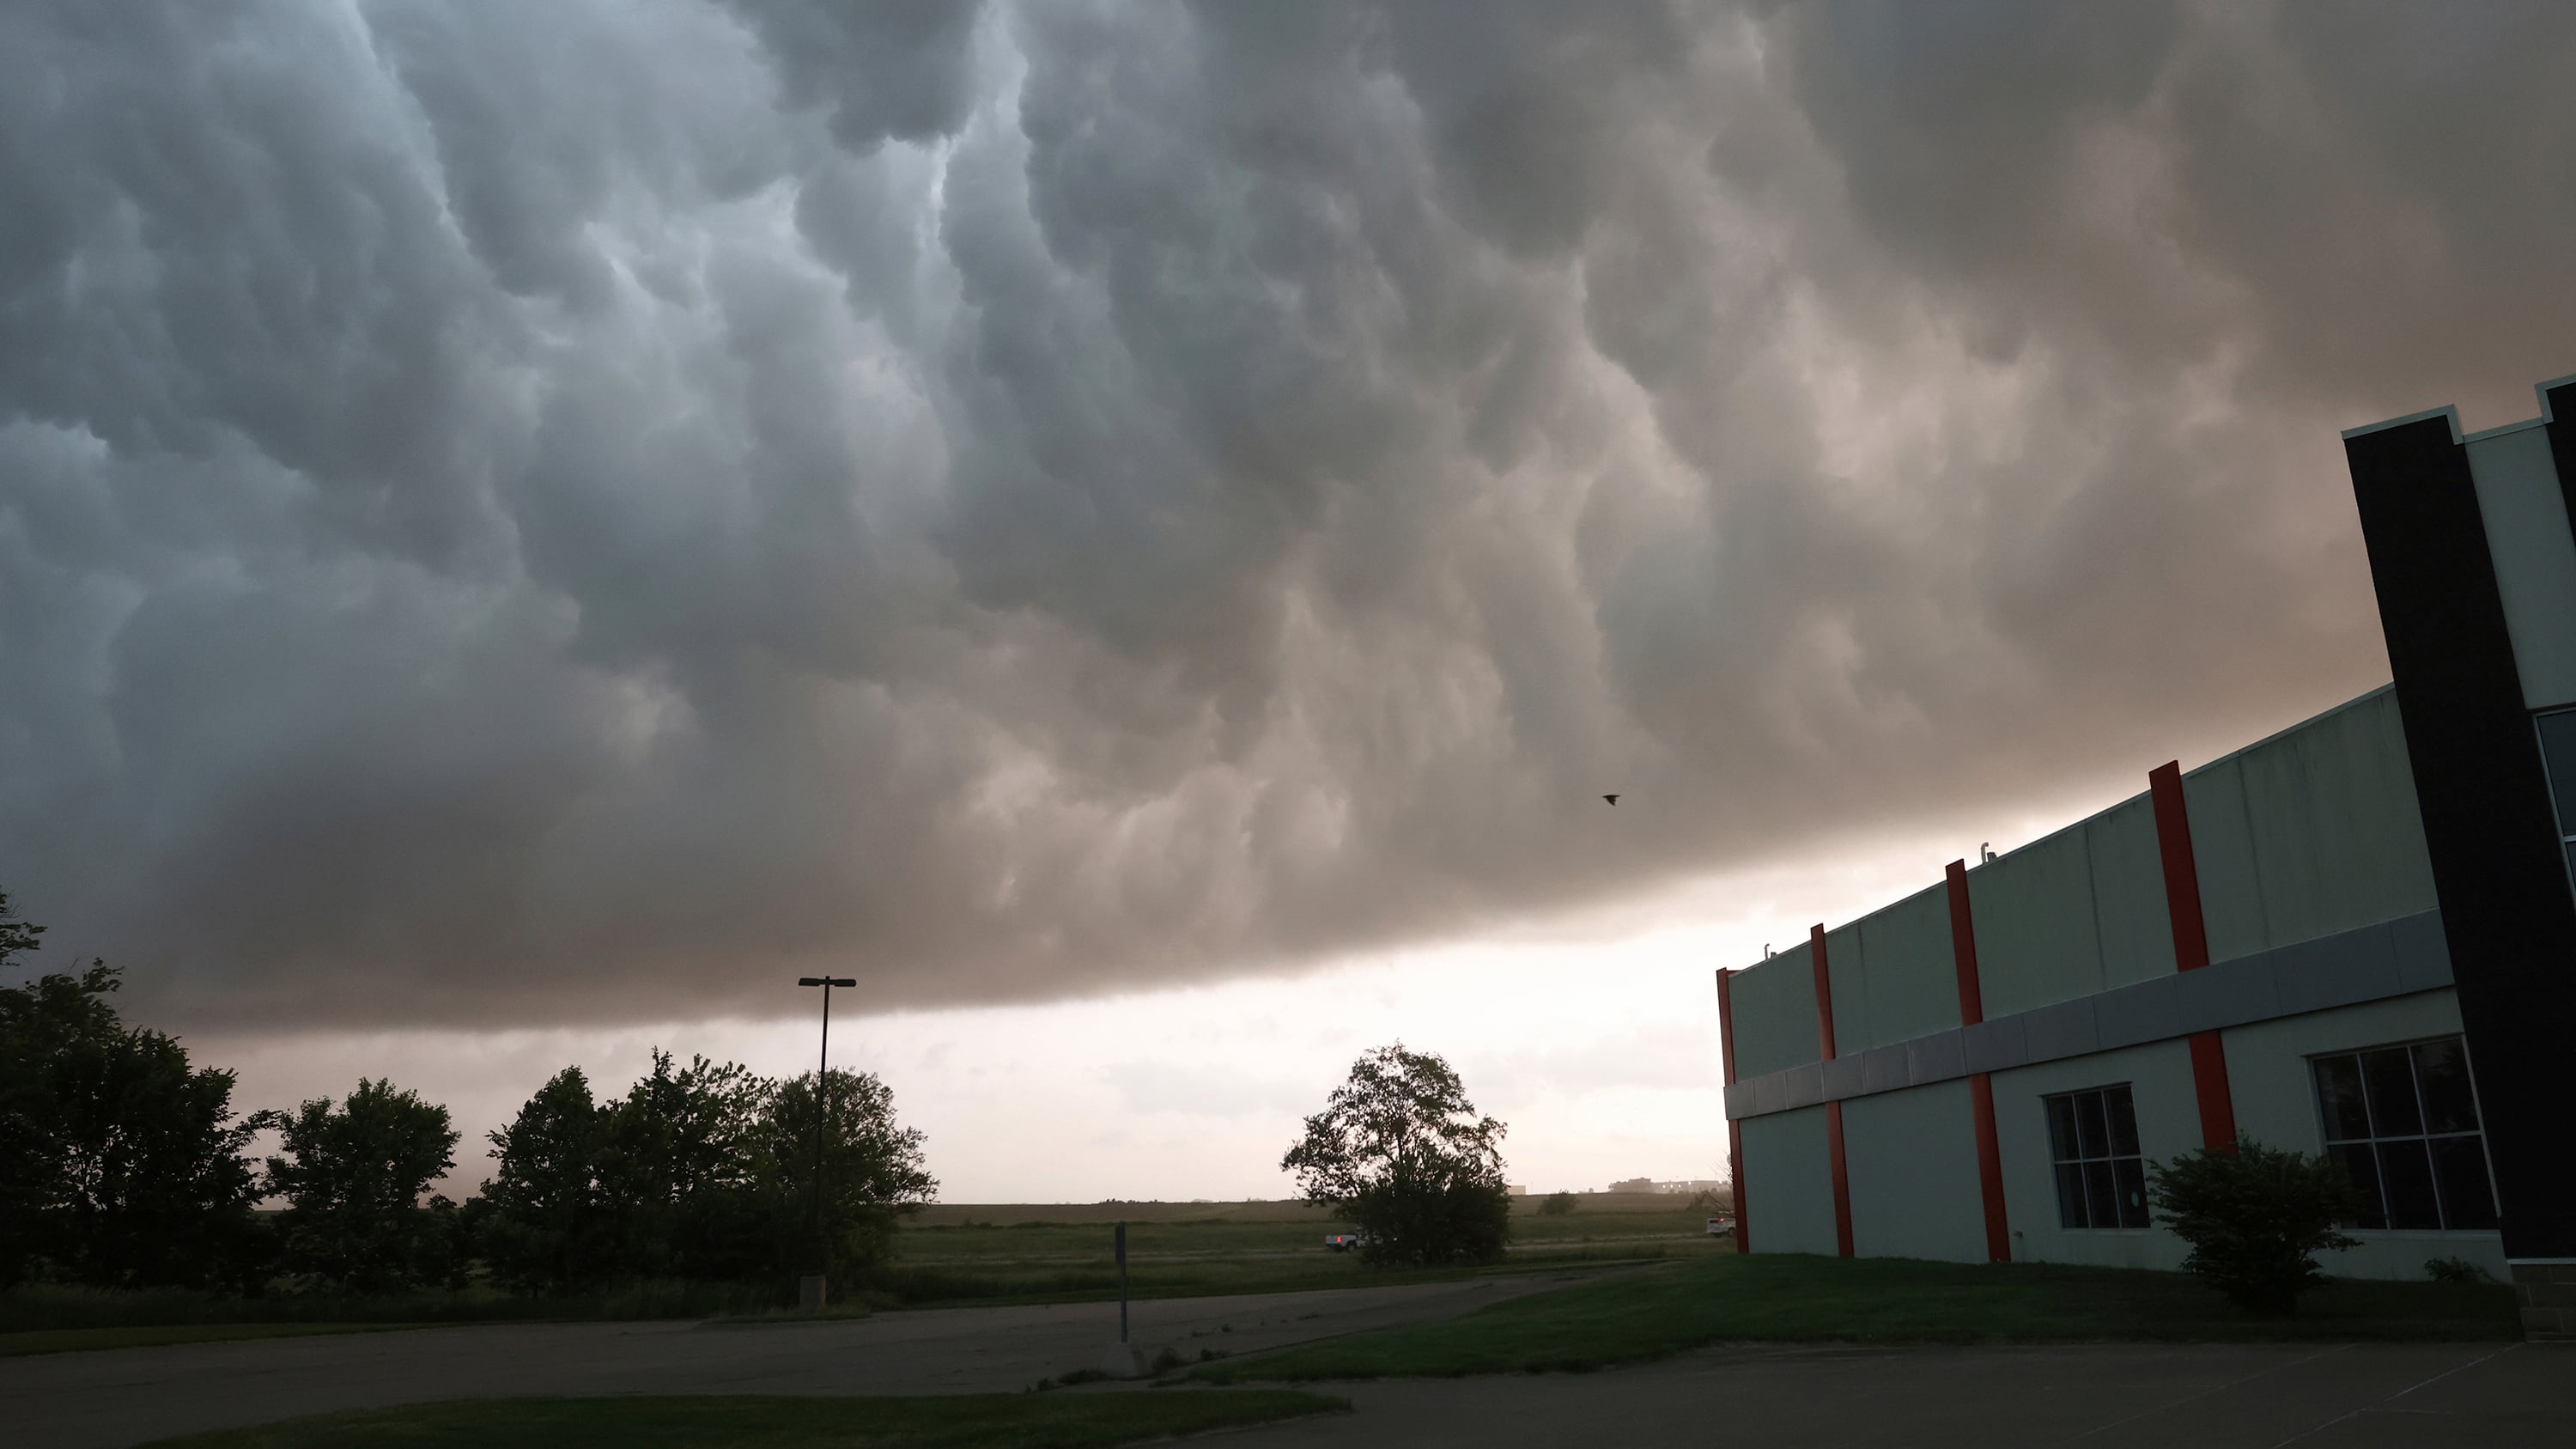 Severe storms hit parts of Texas and Oklahoma on Saturday night